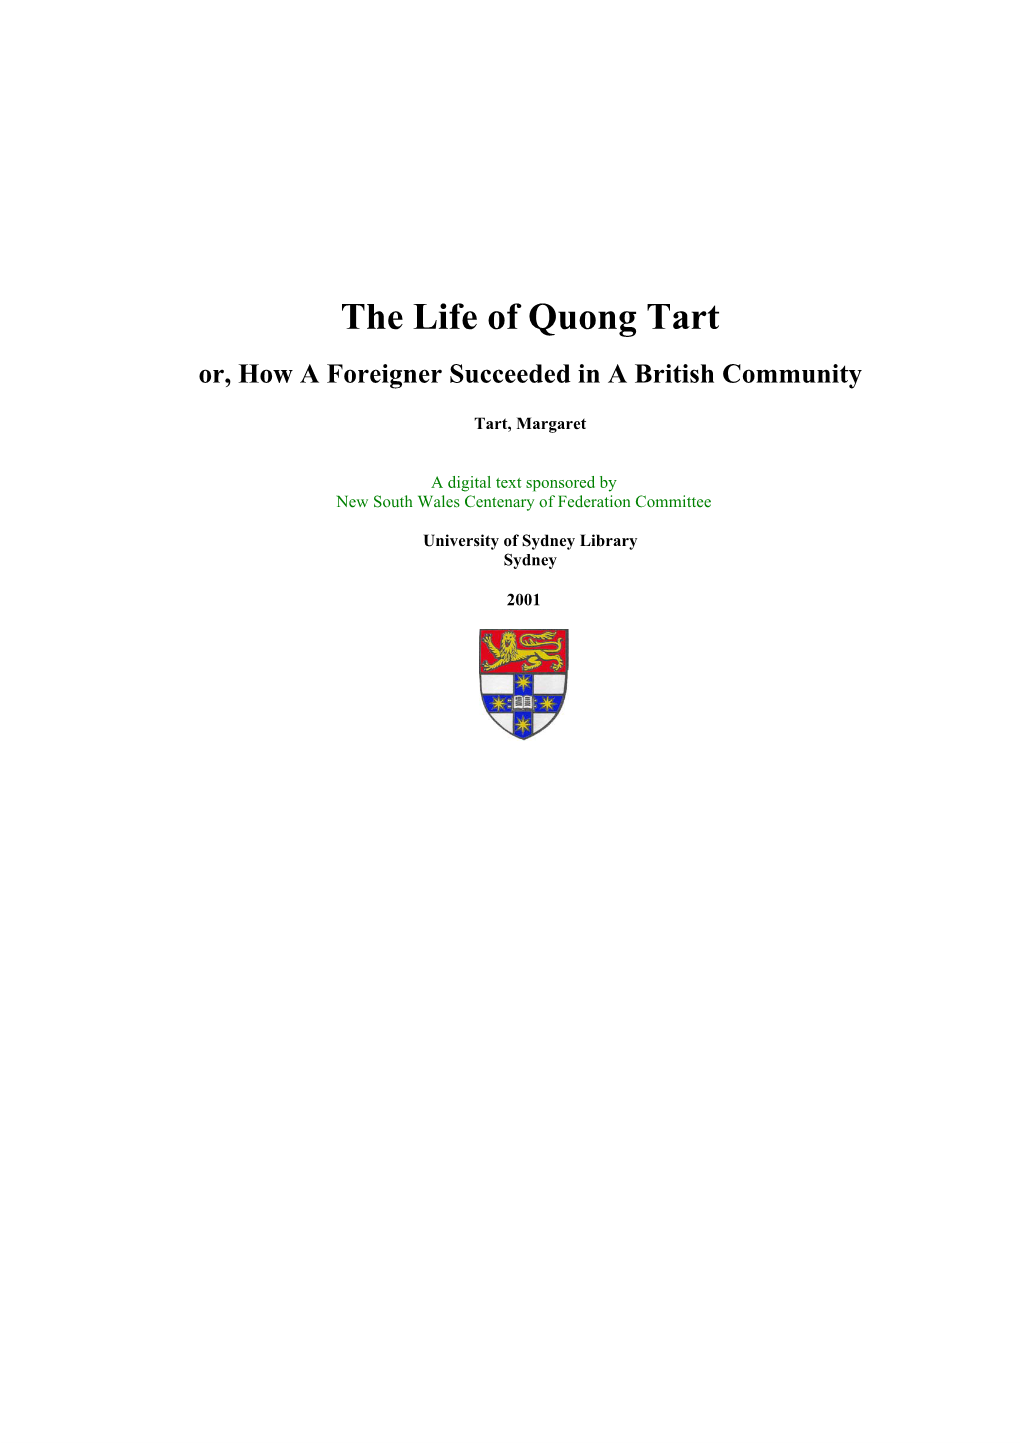 The Life of Quong Tart Or, How a Foreigner Succeeded in a British Community